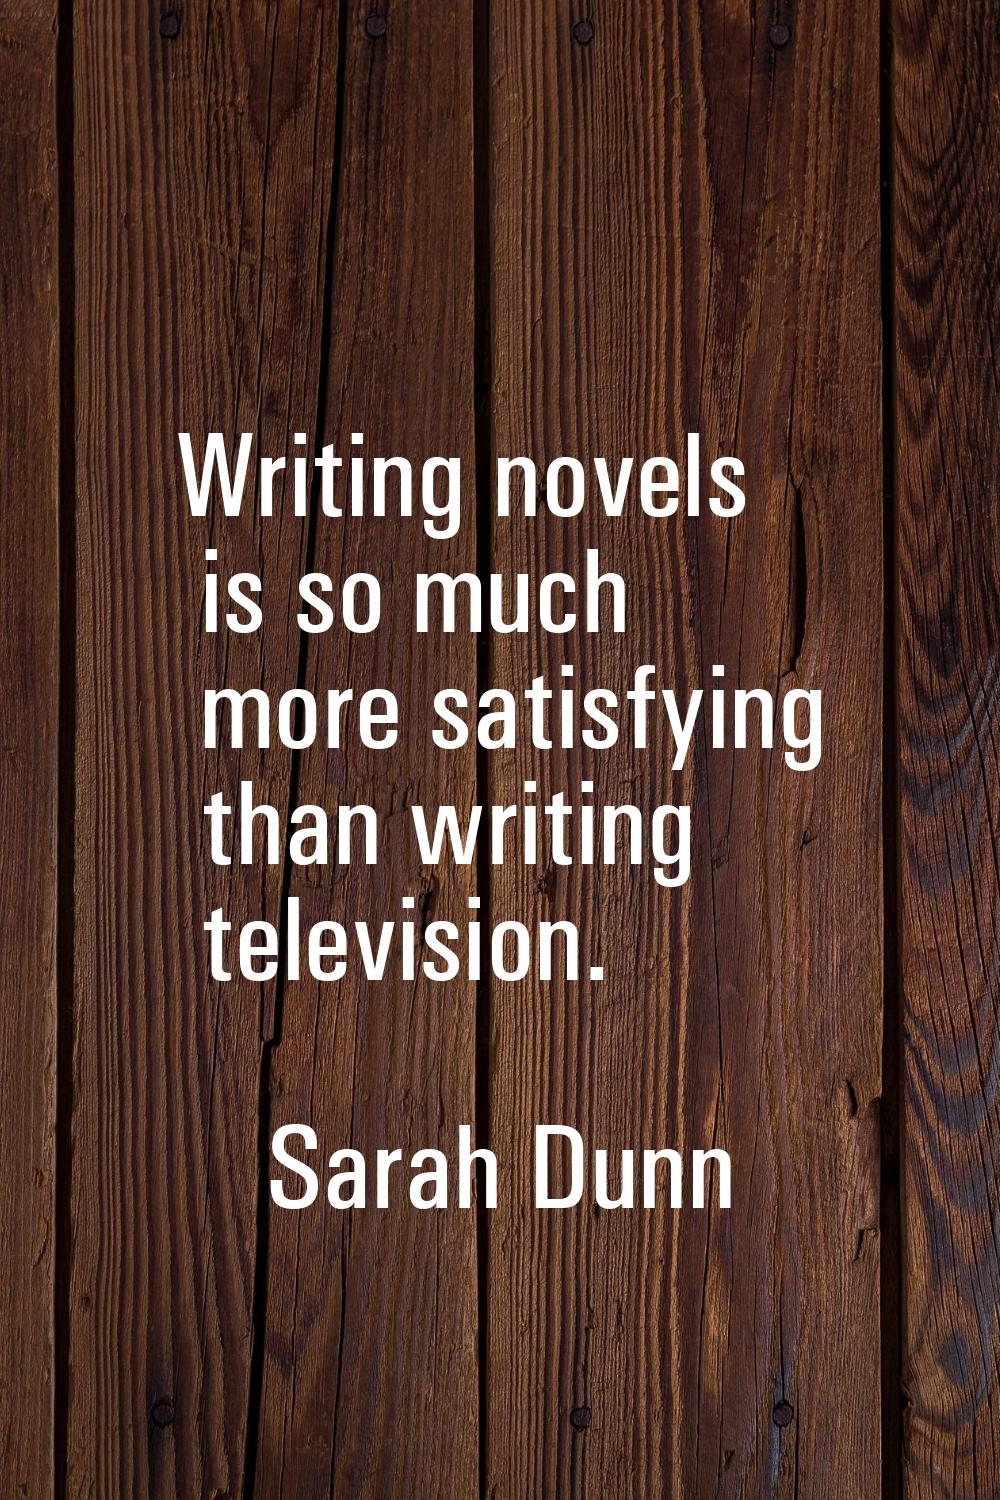 Writing novels is so much more satisfying than writing television.